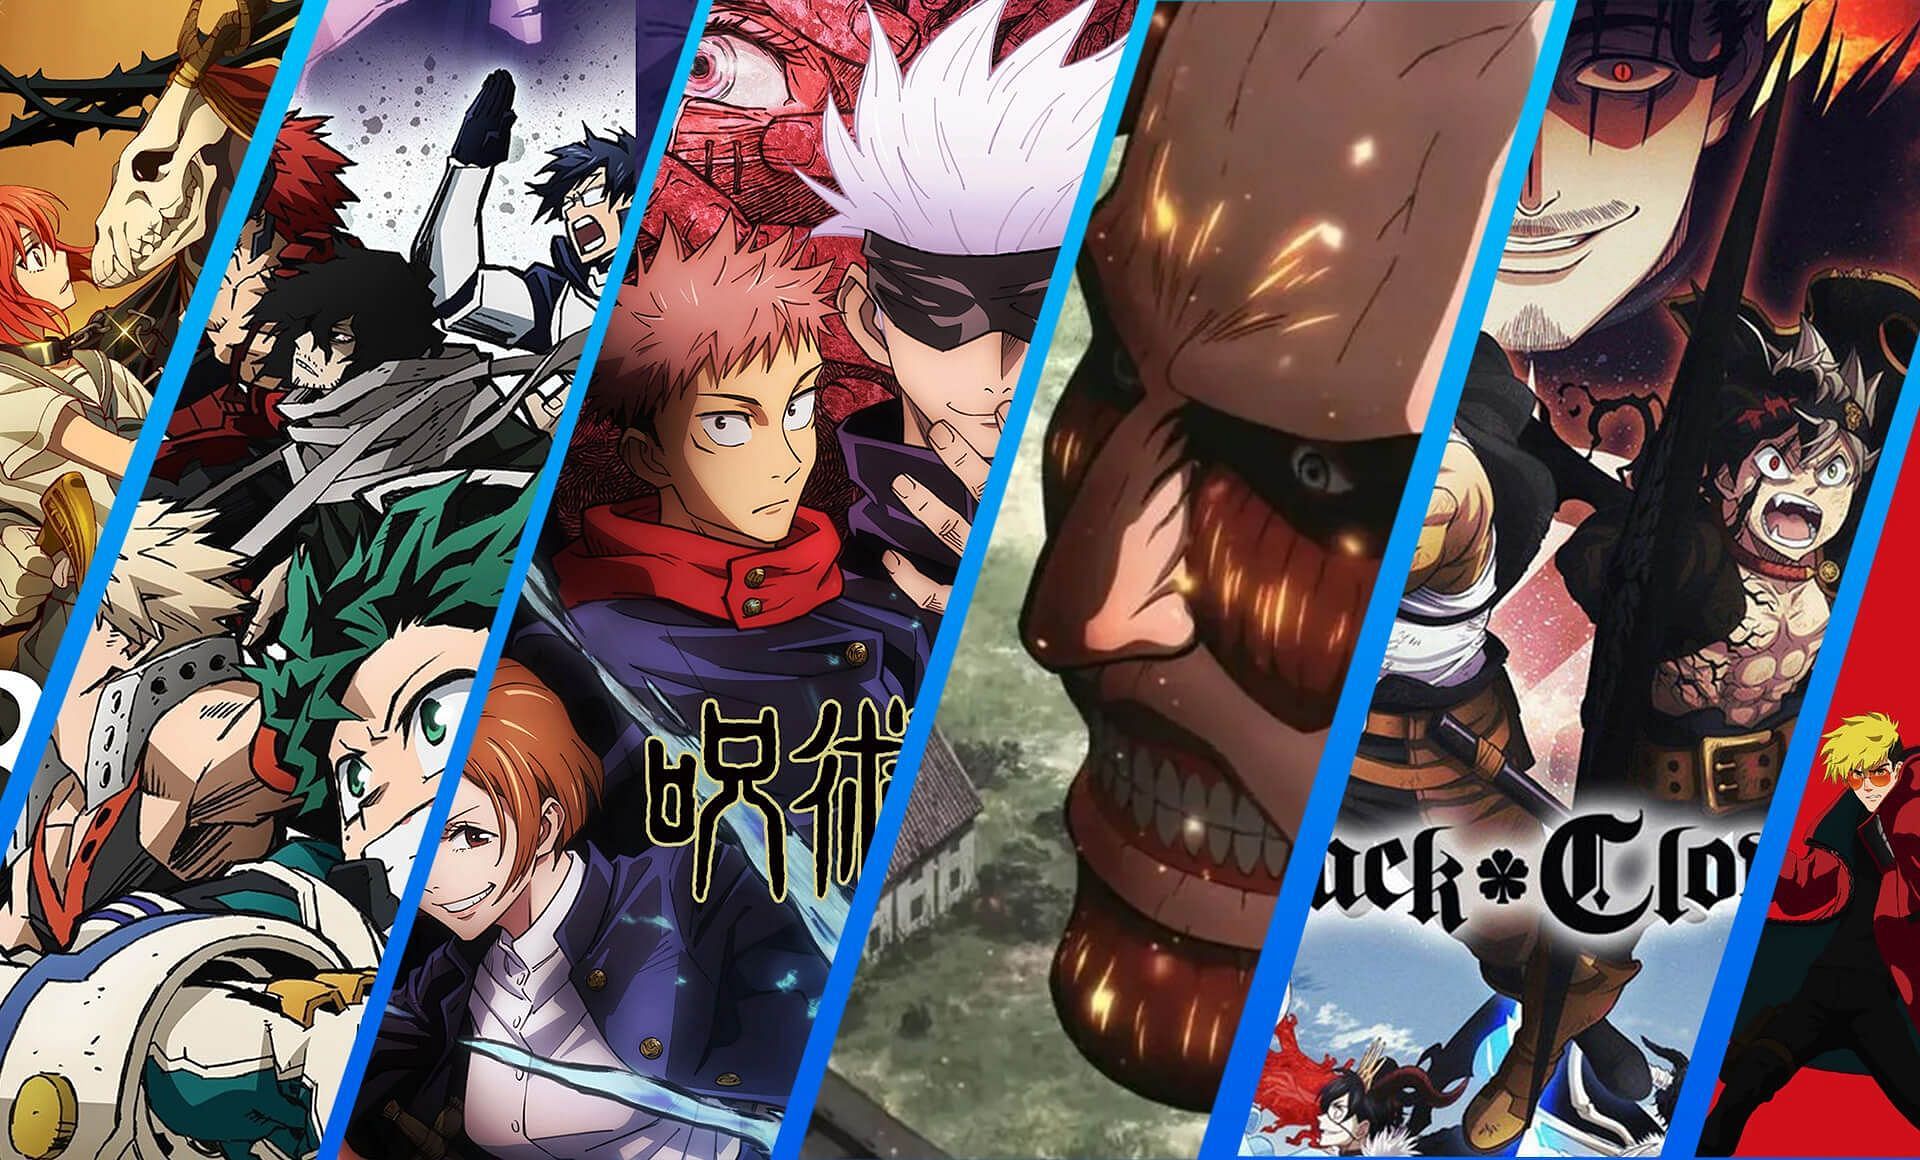 What do you think the best anime pop of the year will be? These